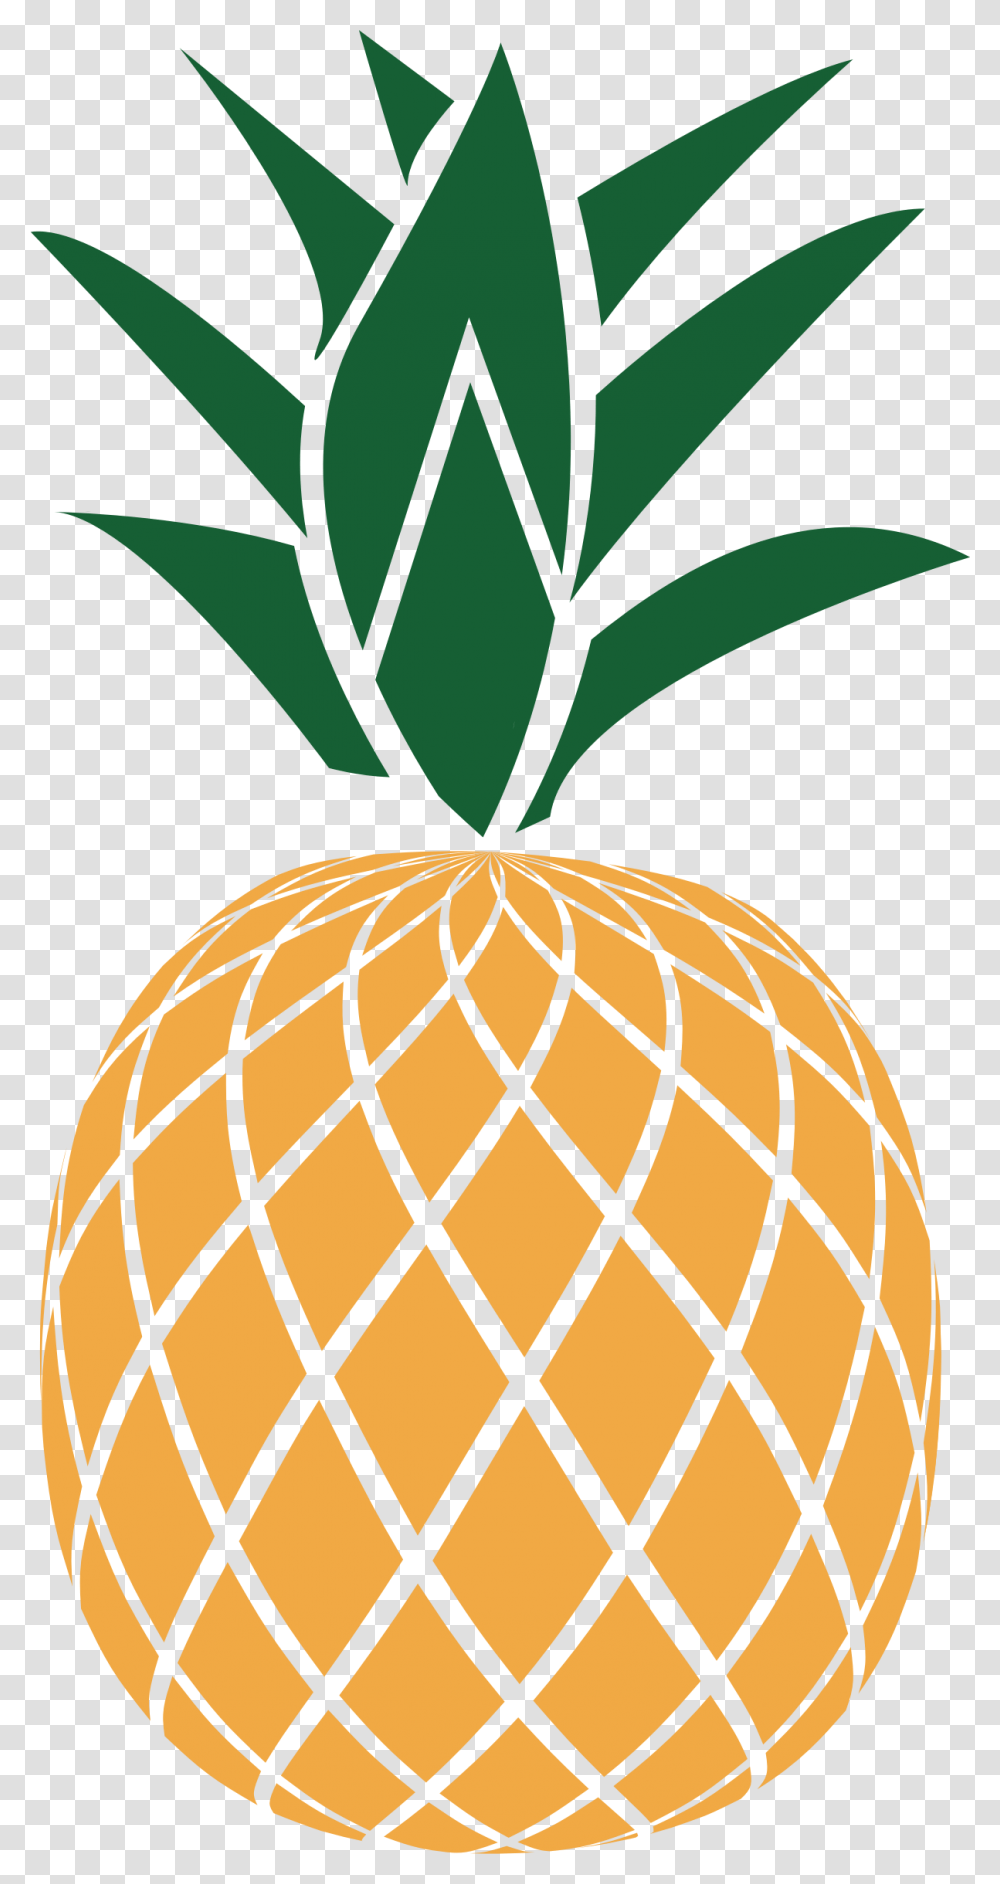 Free Download Pineapple Vector Clipart Pineapple Clip Clipart Pineapple, Leaf, Plant, Dome, Architecture Transparent Png